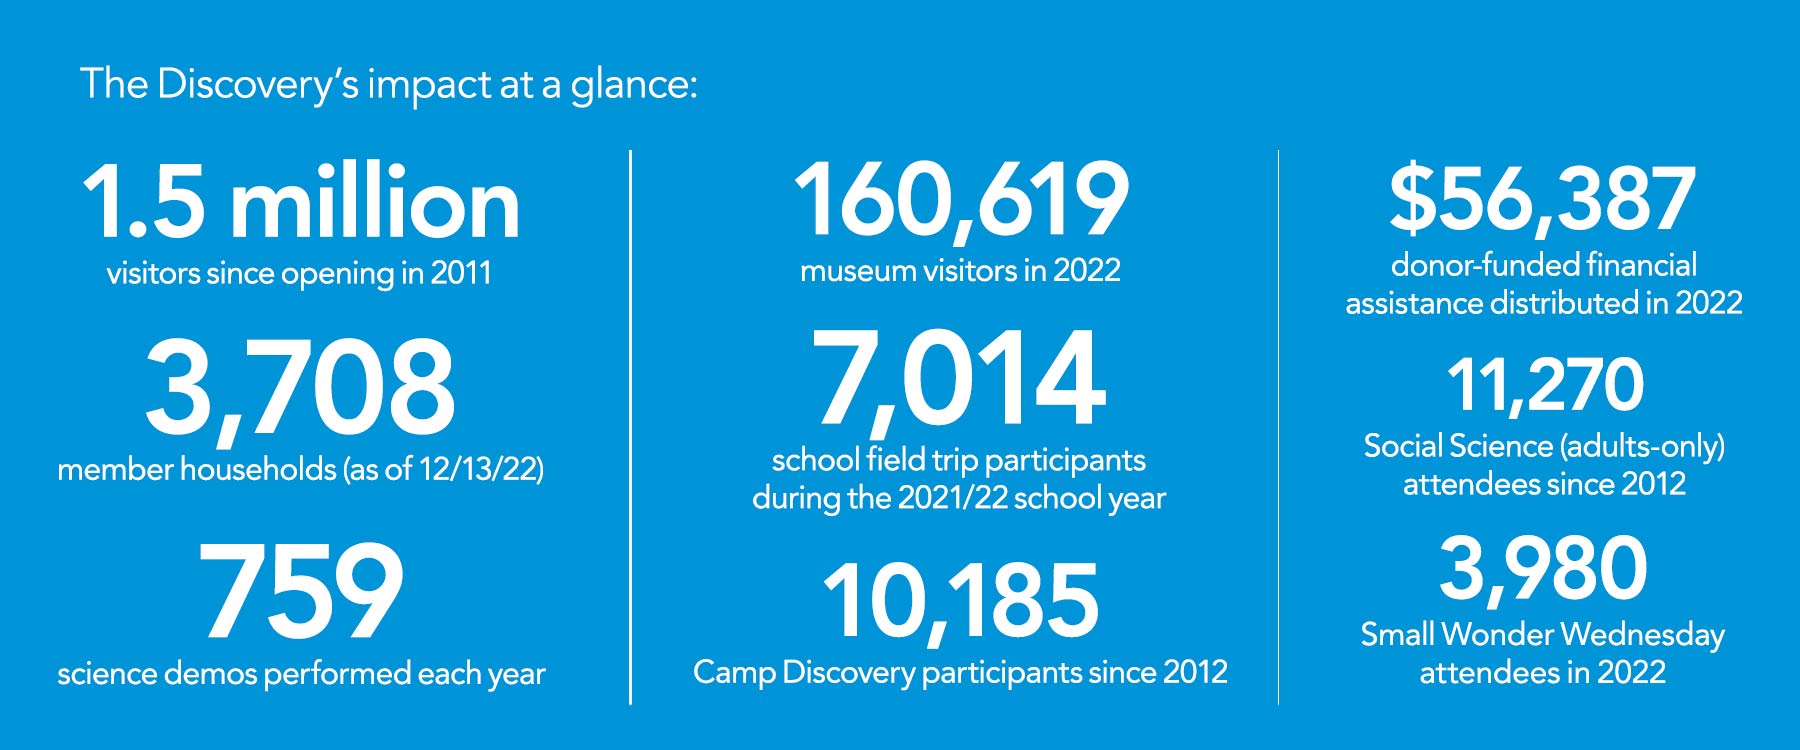 The Discovery’s Impact at a Glance 2023